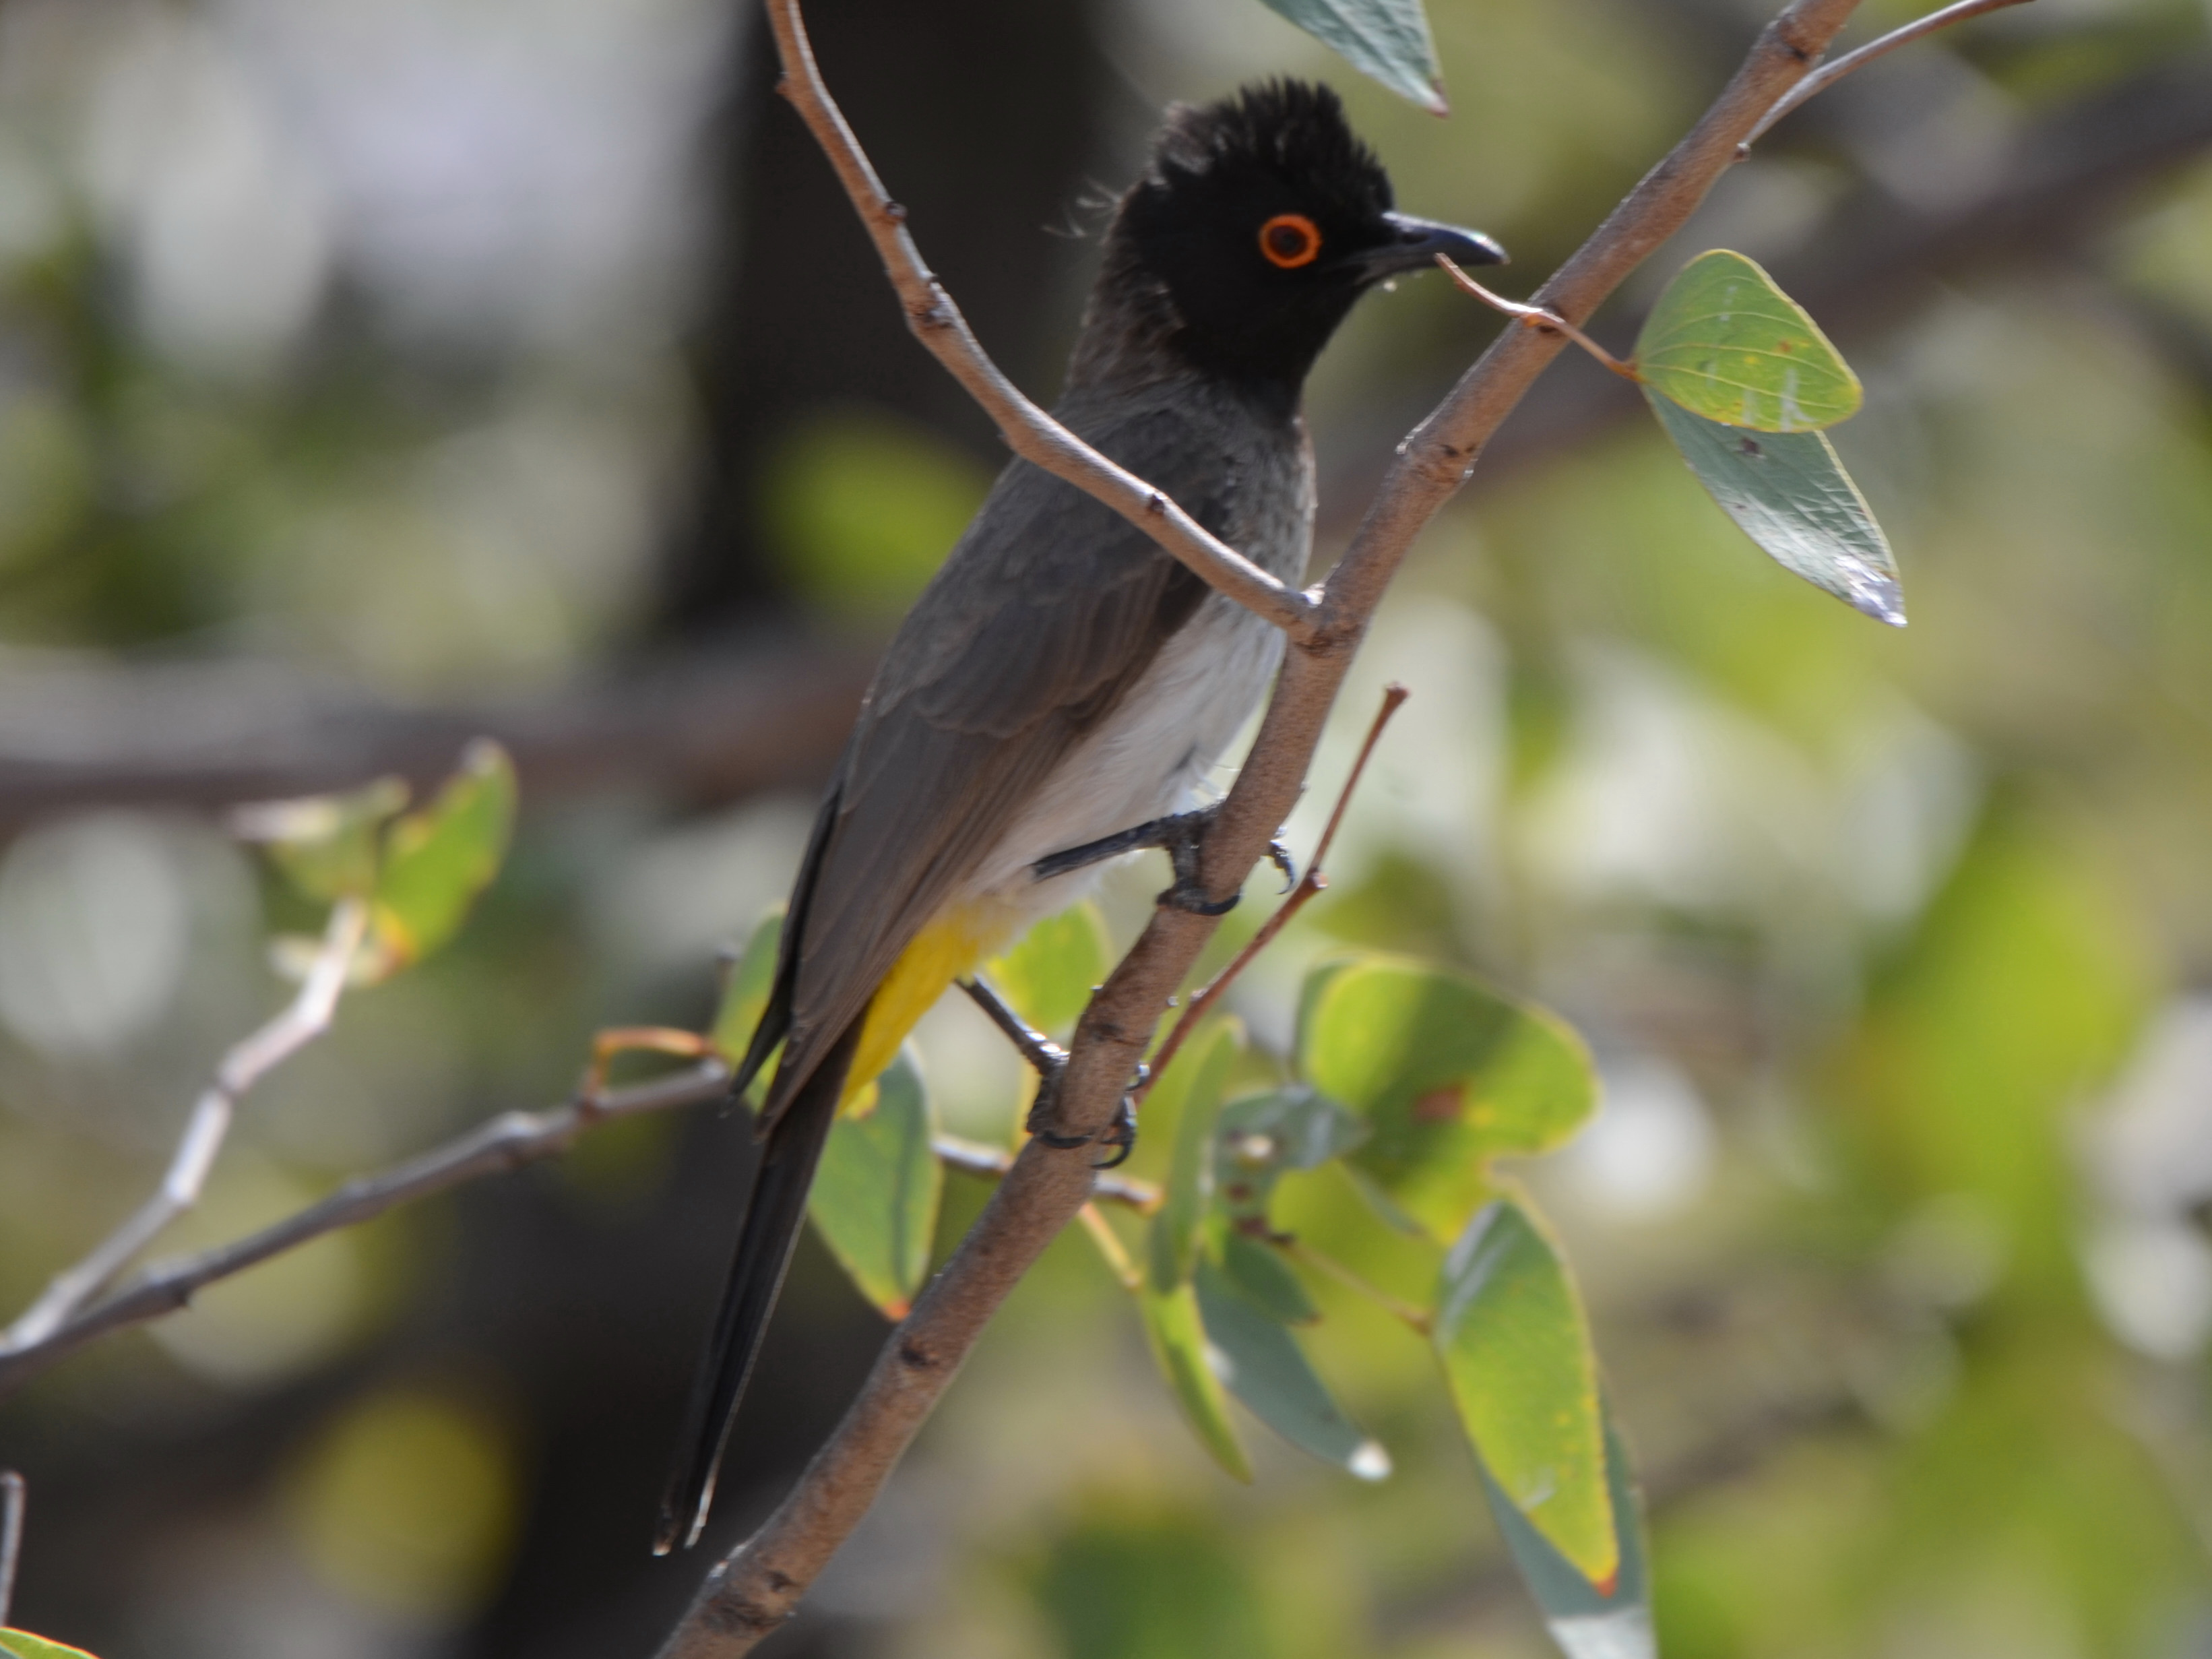 Click picture to see more African Red-eyed Bulbuls.